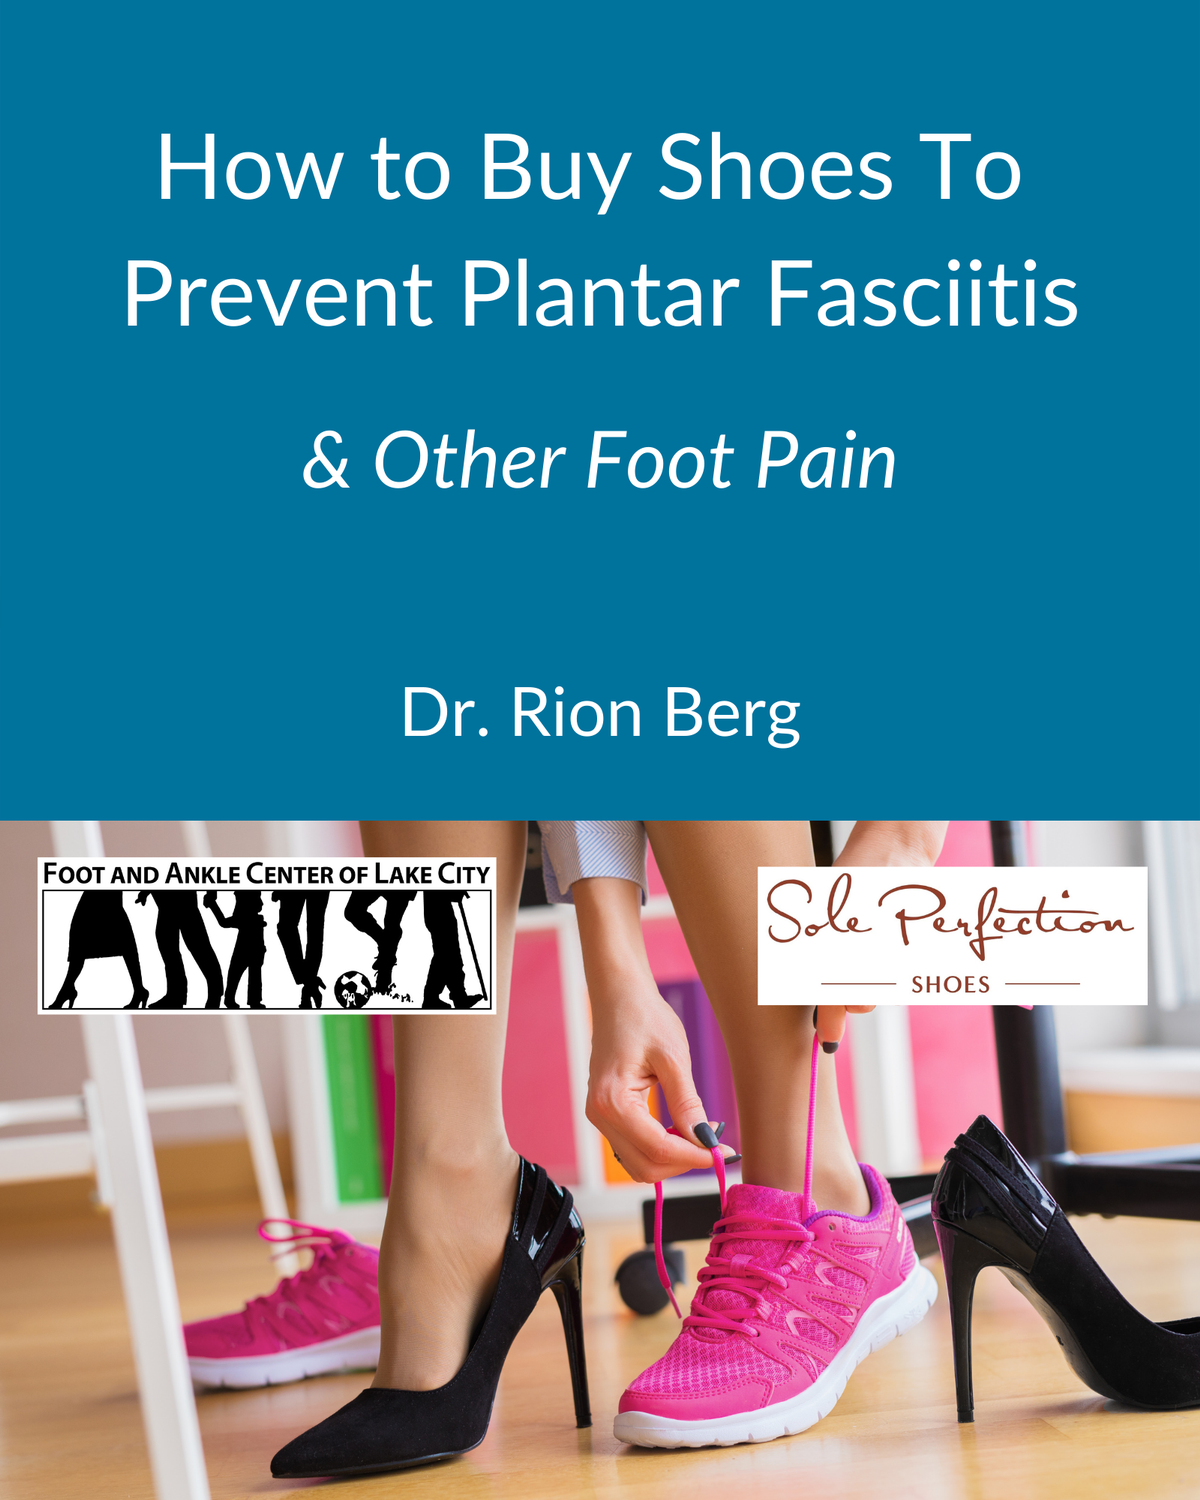 How to Buy Shoes to Prevent Plantar Fasciitis in Seattle